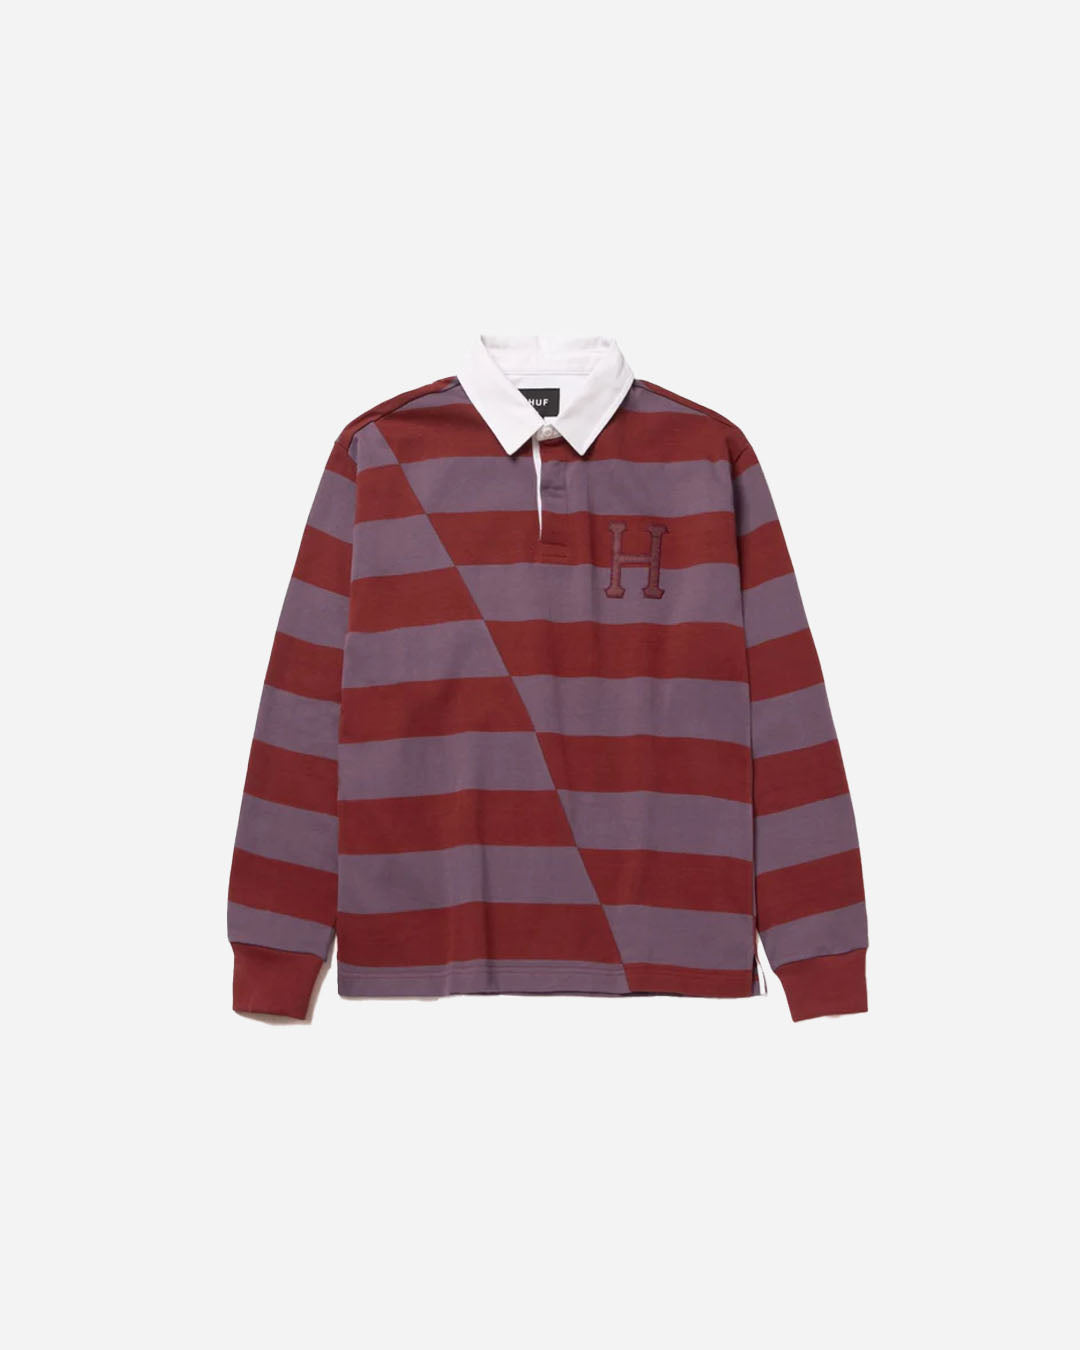 YORKE L/S RUGBY SHIRT